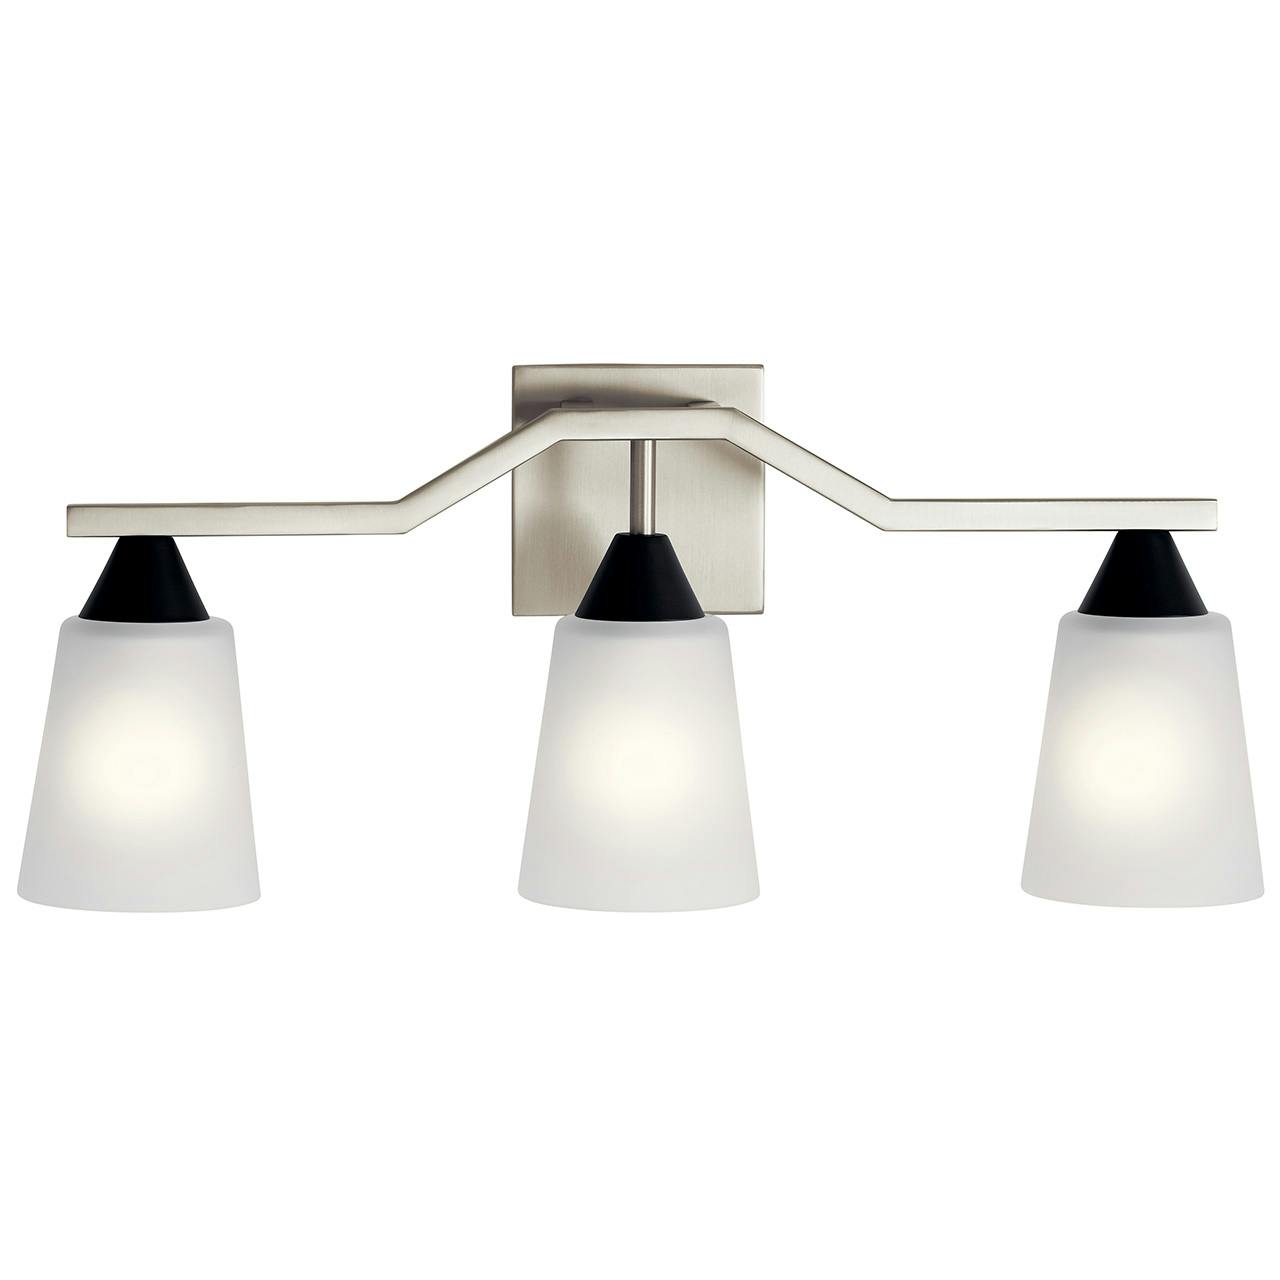 The Skagos 3 Light Vanity Light Nickel facing down on a white background